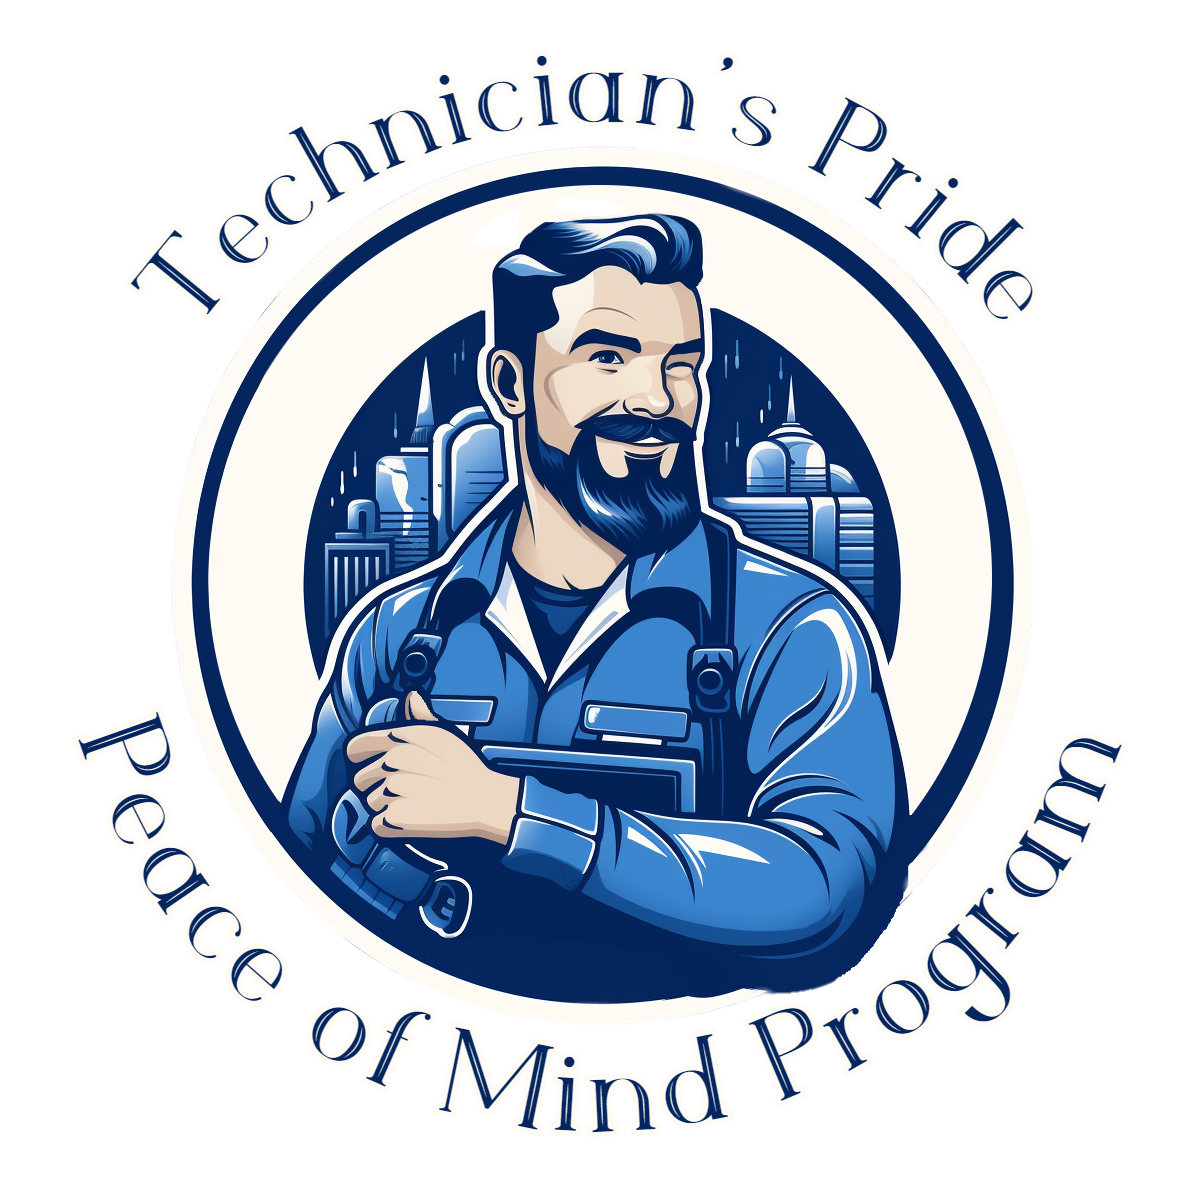 Technician's Pride Peace of Mind Program for Complete Heat Pump Systems